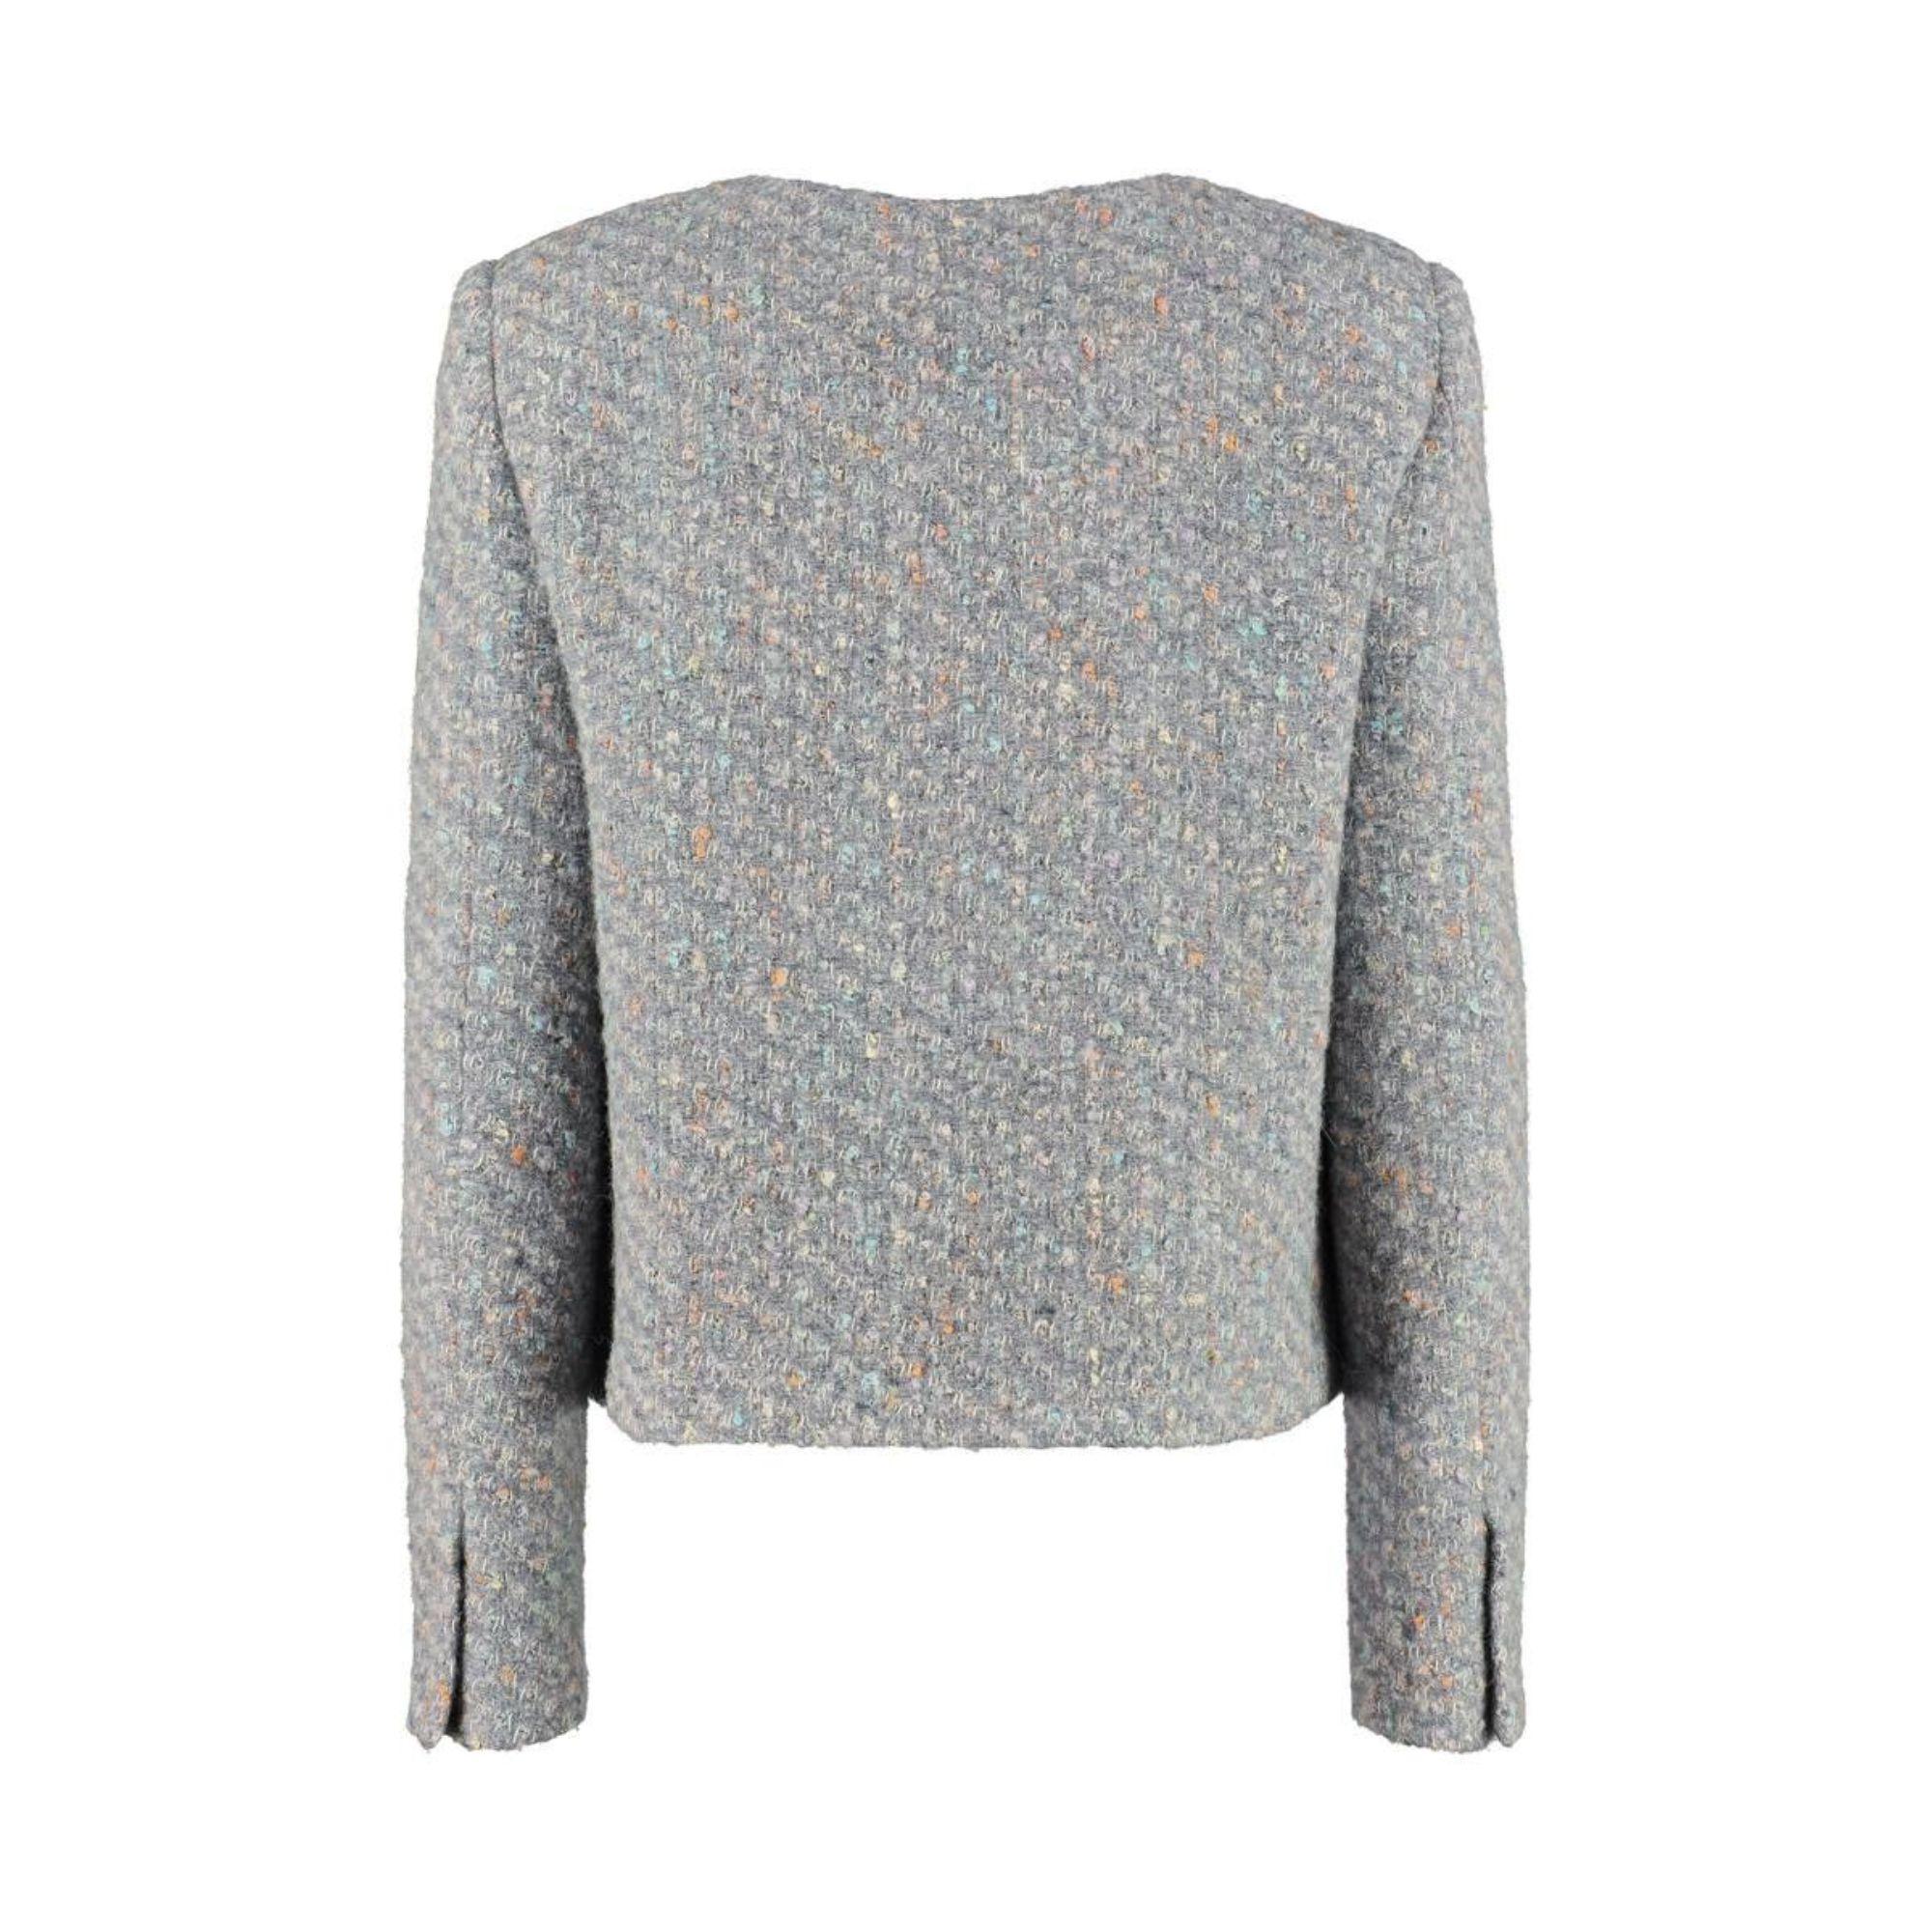 AW20 Moschino Couture Jeremy Scott Boucle Wool Jacket in Gray & Oversized Zipper

Additional Information:
Material: 53% Virgin Wool, 38% Cotton, 7% PL, 2% PC
Color: Gray, Light Blue, Orange, Purple
Size: IT 42 / US 8
Pattern: Abstract
Style: